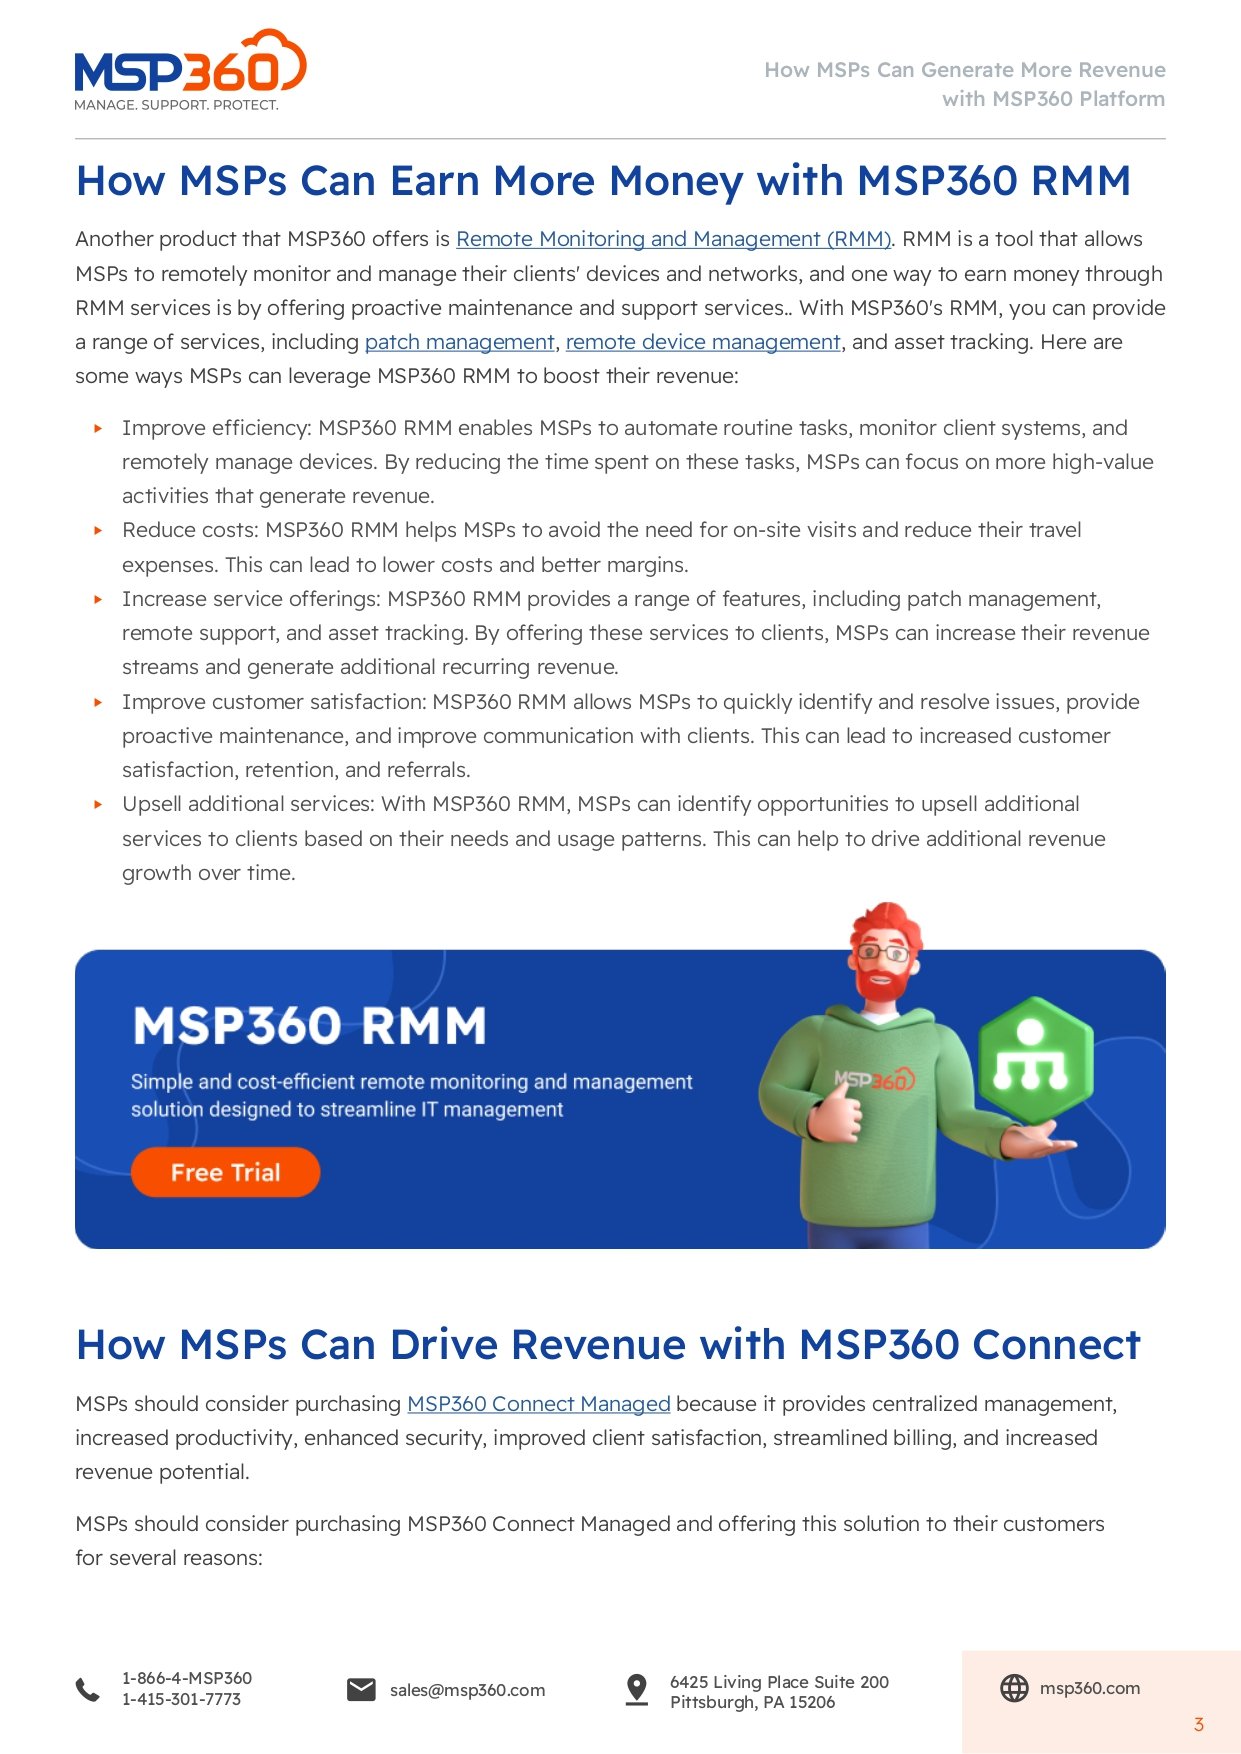 How MSPs Can Generate More Revenue with MSP360 Platform (1)_page-0003